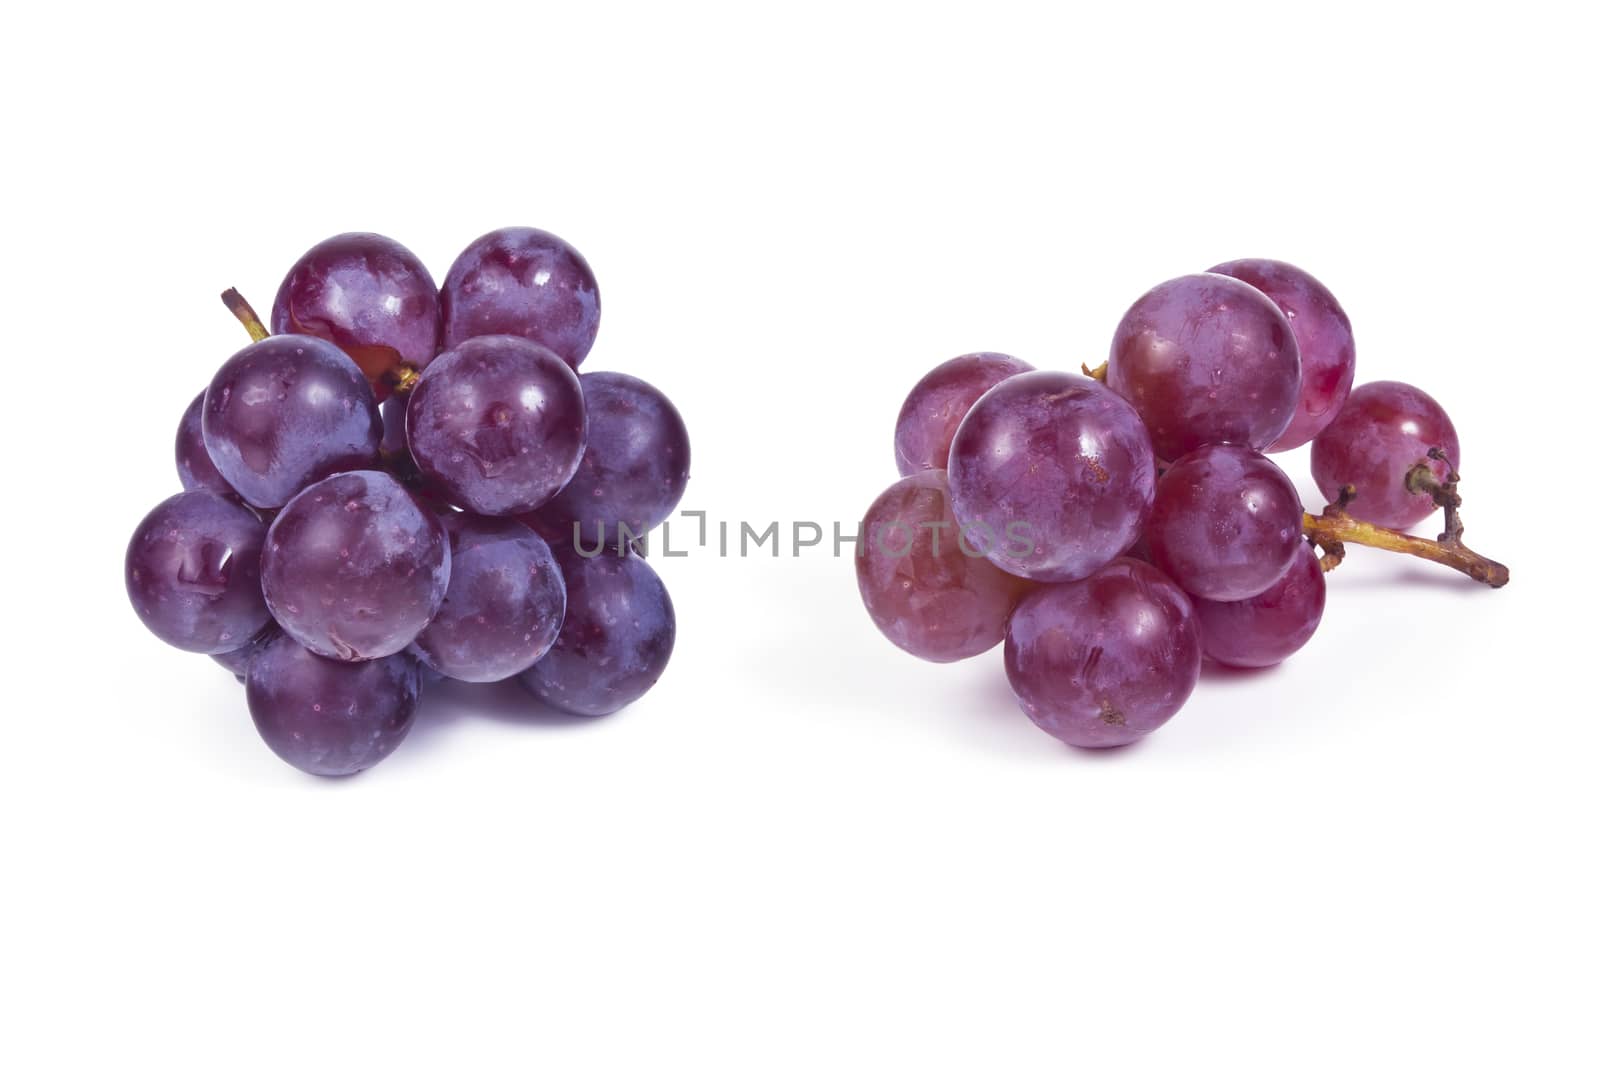 A small paintbrush of dark grapes on white background